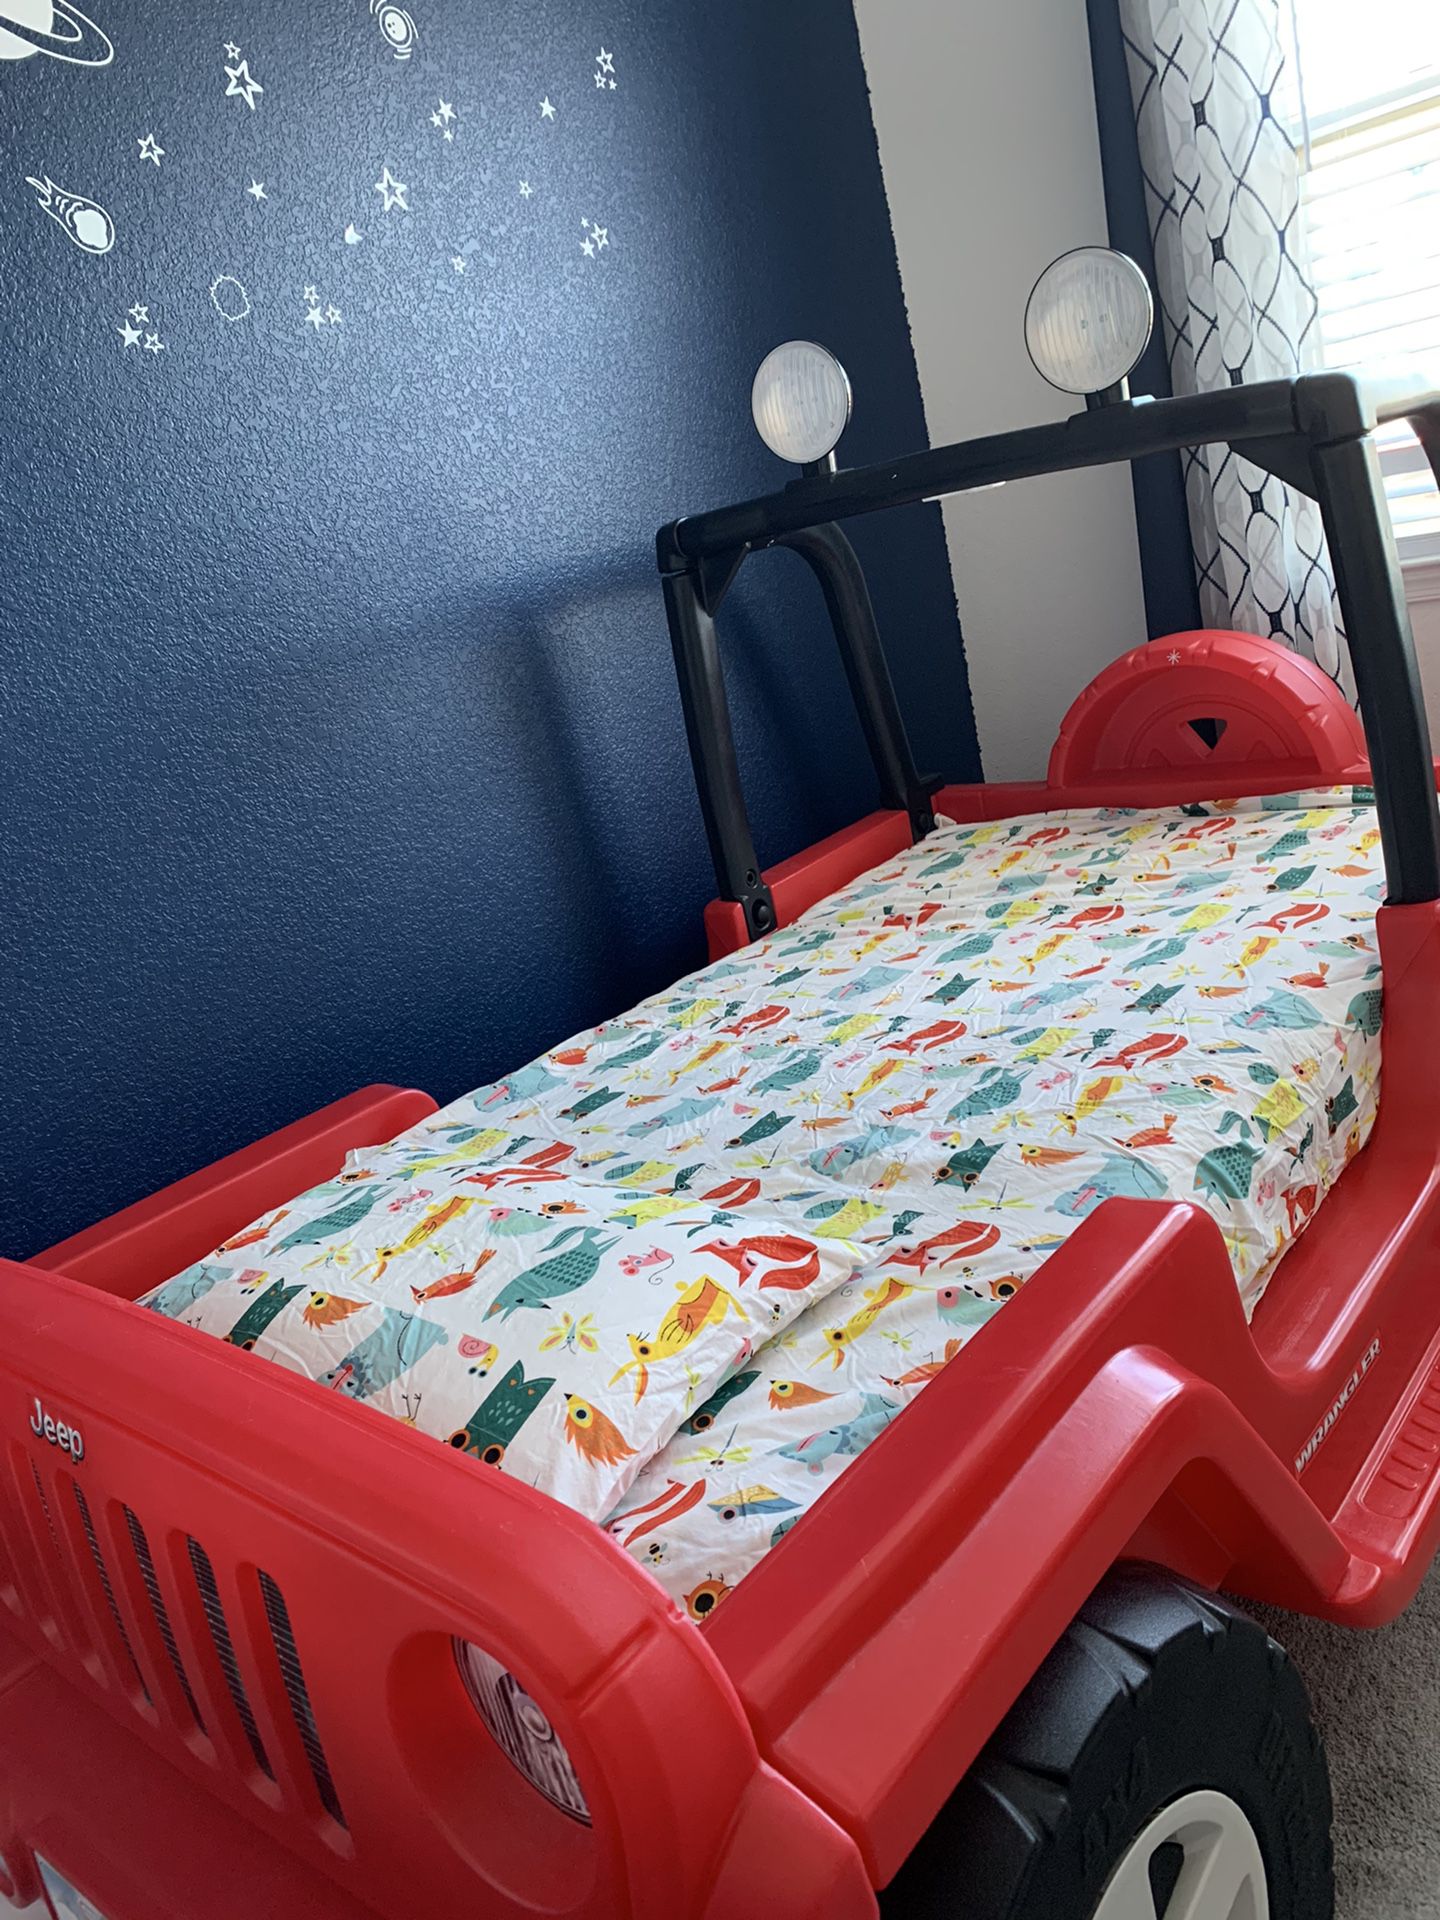 Kids Jeep Bed For Sale for Sale in Virginia Beach, VA - OfferUp